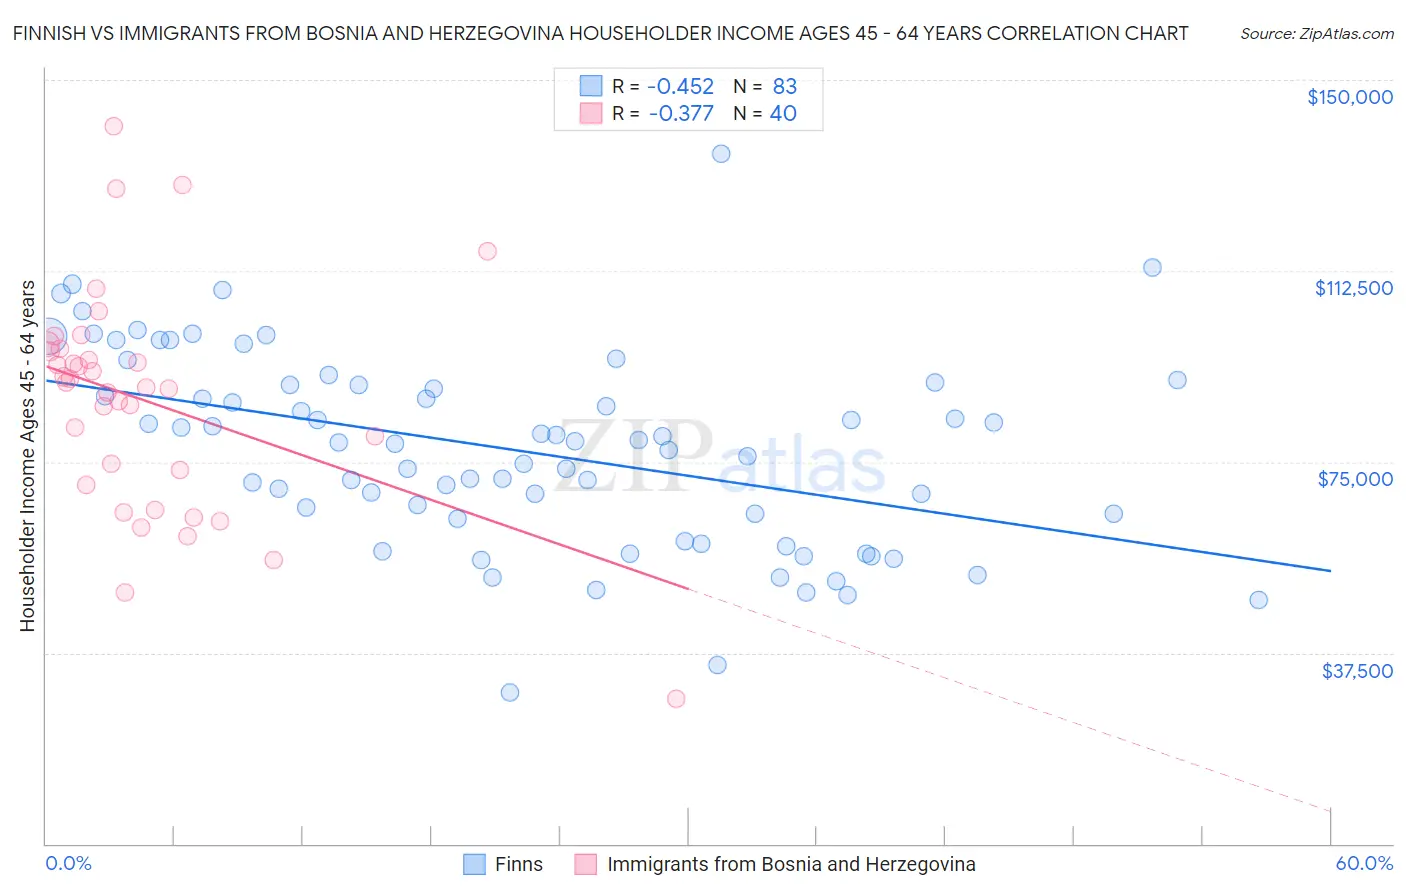 Finnish vs Immigrants from Bosnia and Herzegovina Householder Income Ages 45 - 64 years